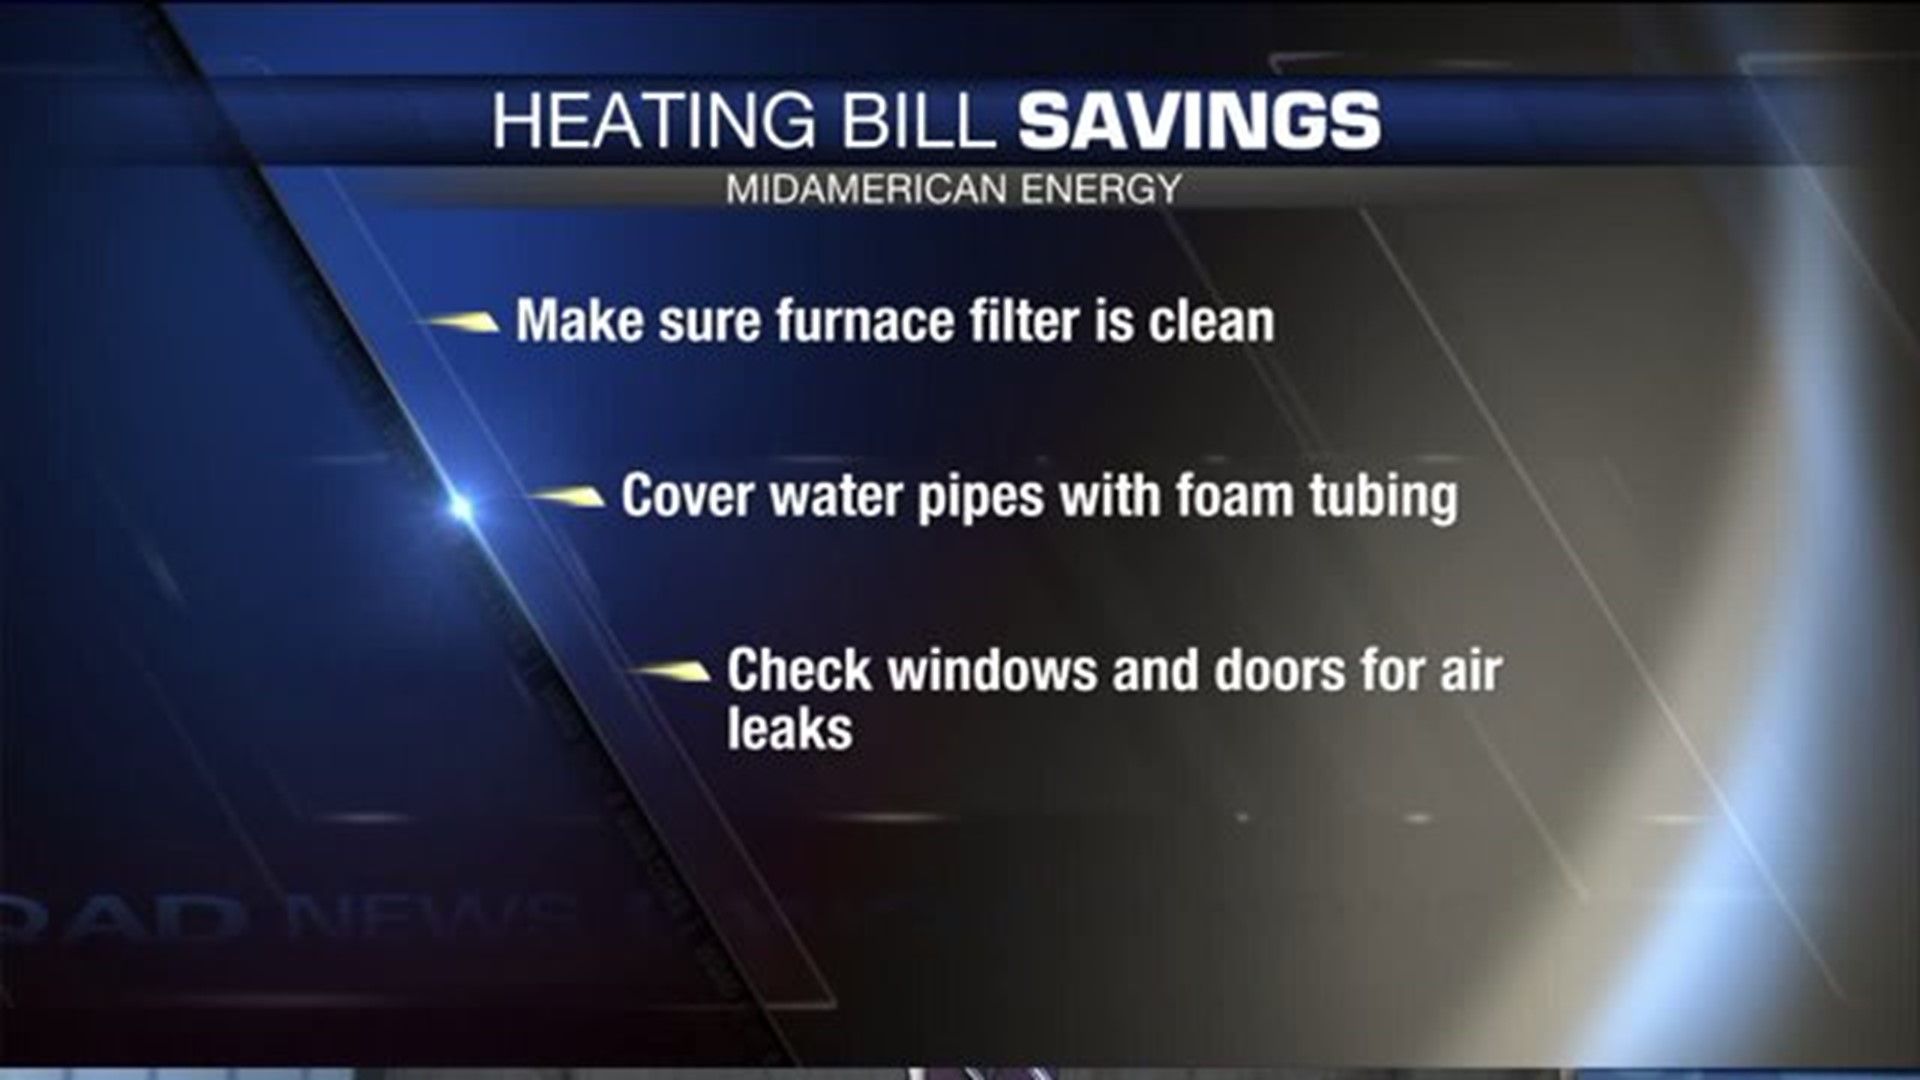 Tips to cut your heating bill